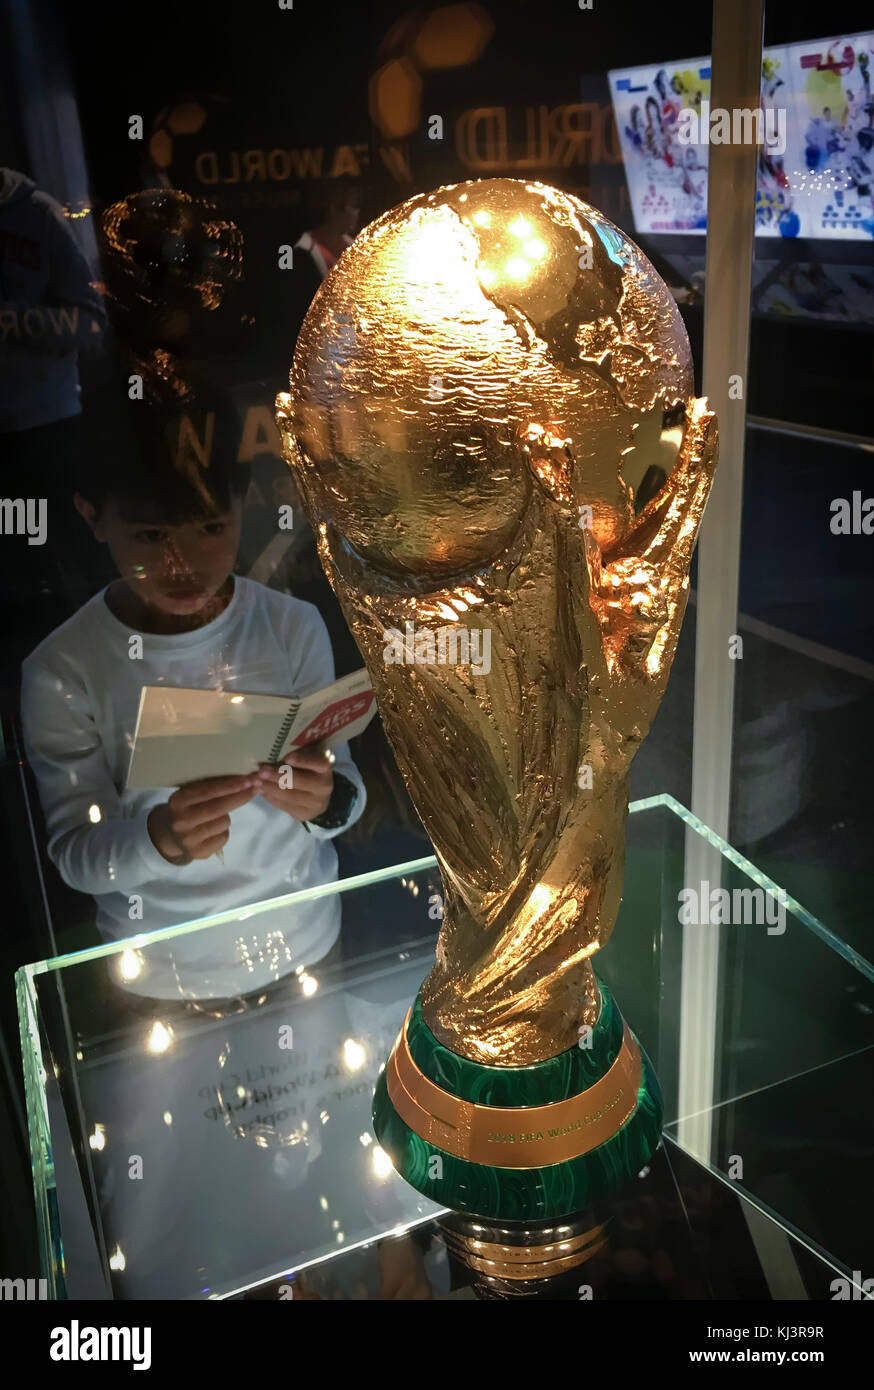 Zurich, Switzerland-12 Nov 2017: A little boy is watching the FIFA World Cup trophy exhibited at the FIFA World football museum in Zurich, Switzerland Stock Photo